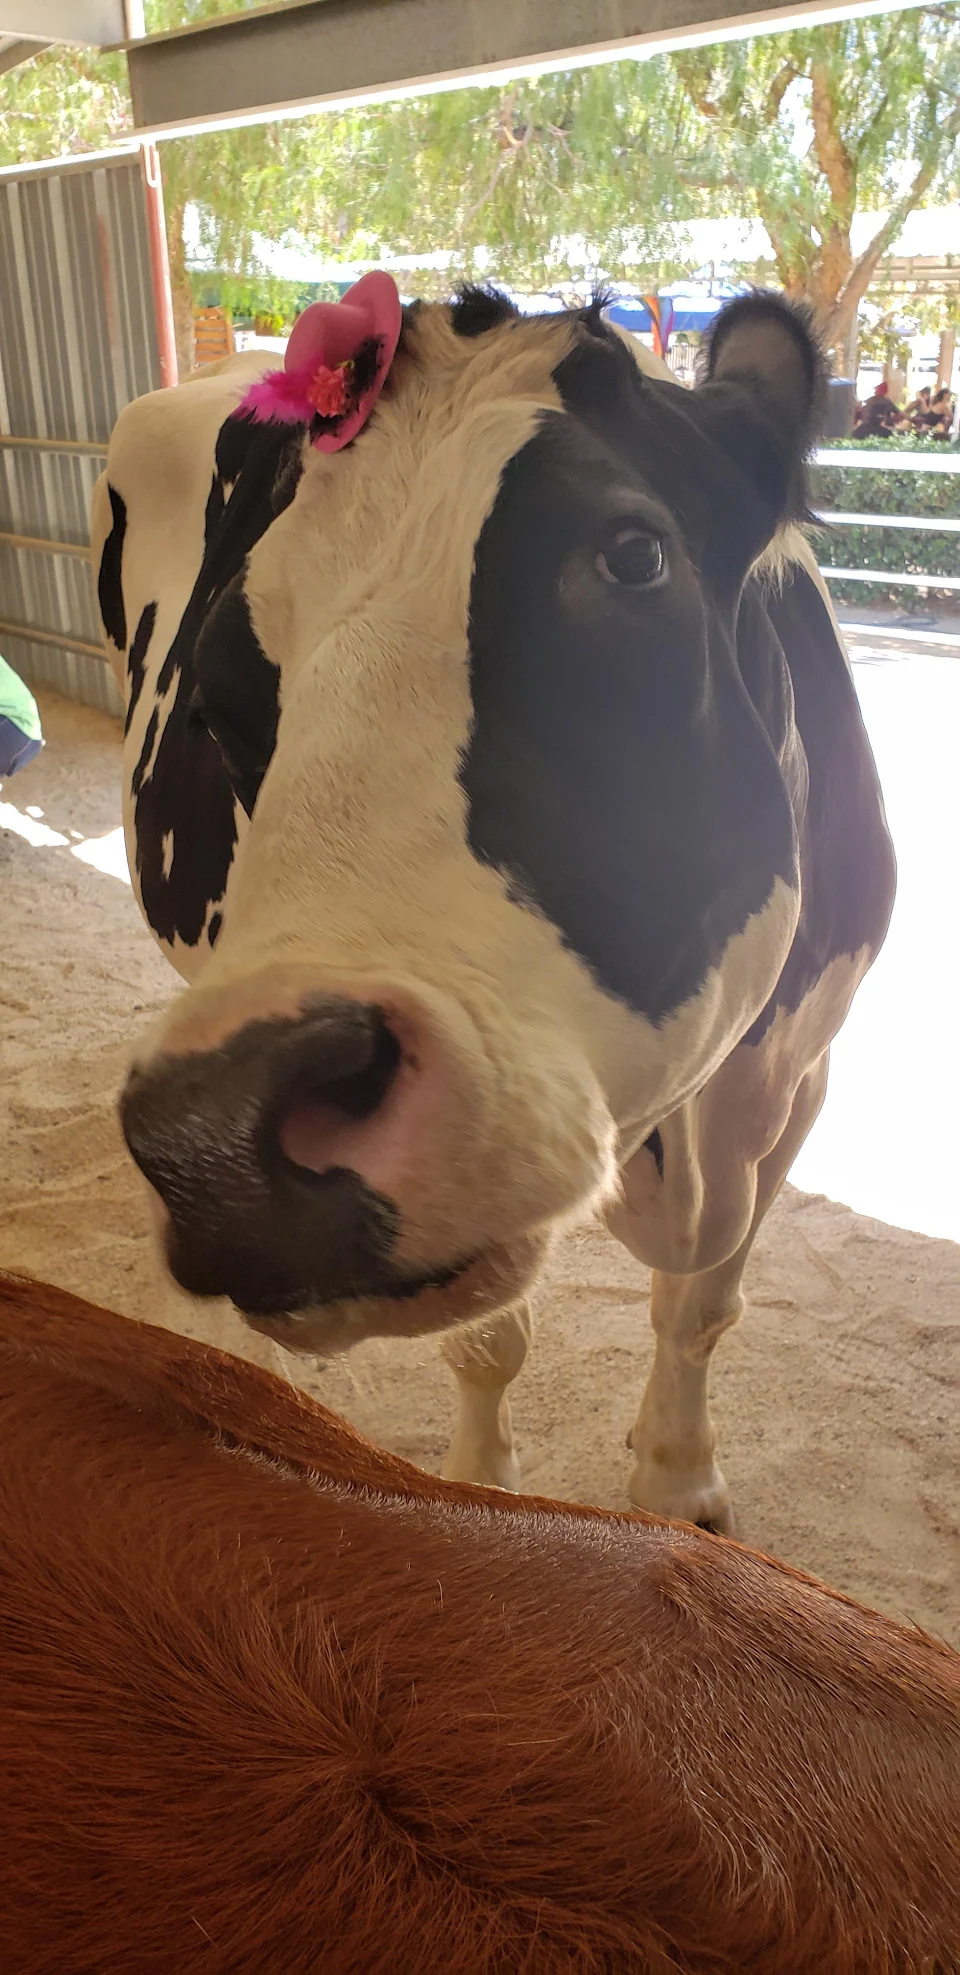 I met this cutie by the name of Holy Cow at The Gentle Barn in Santa Clarita, CA today. I think she could use this on her dating profile.